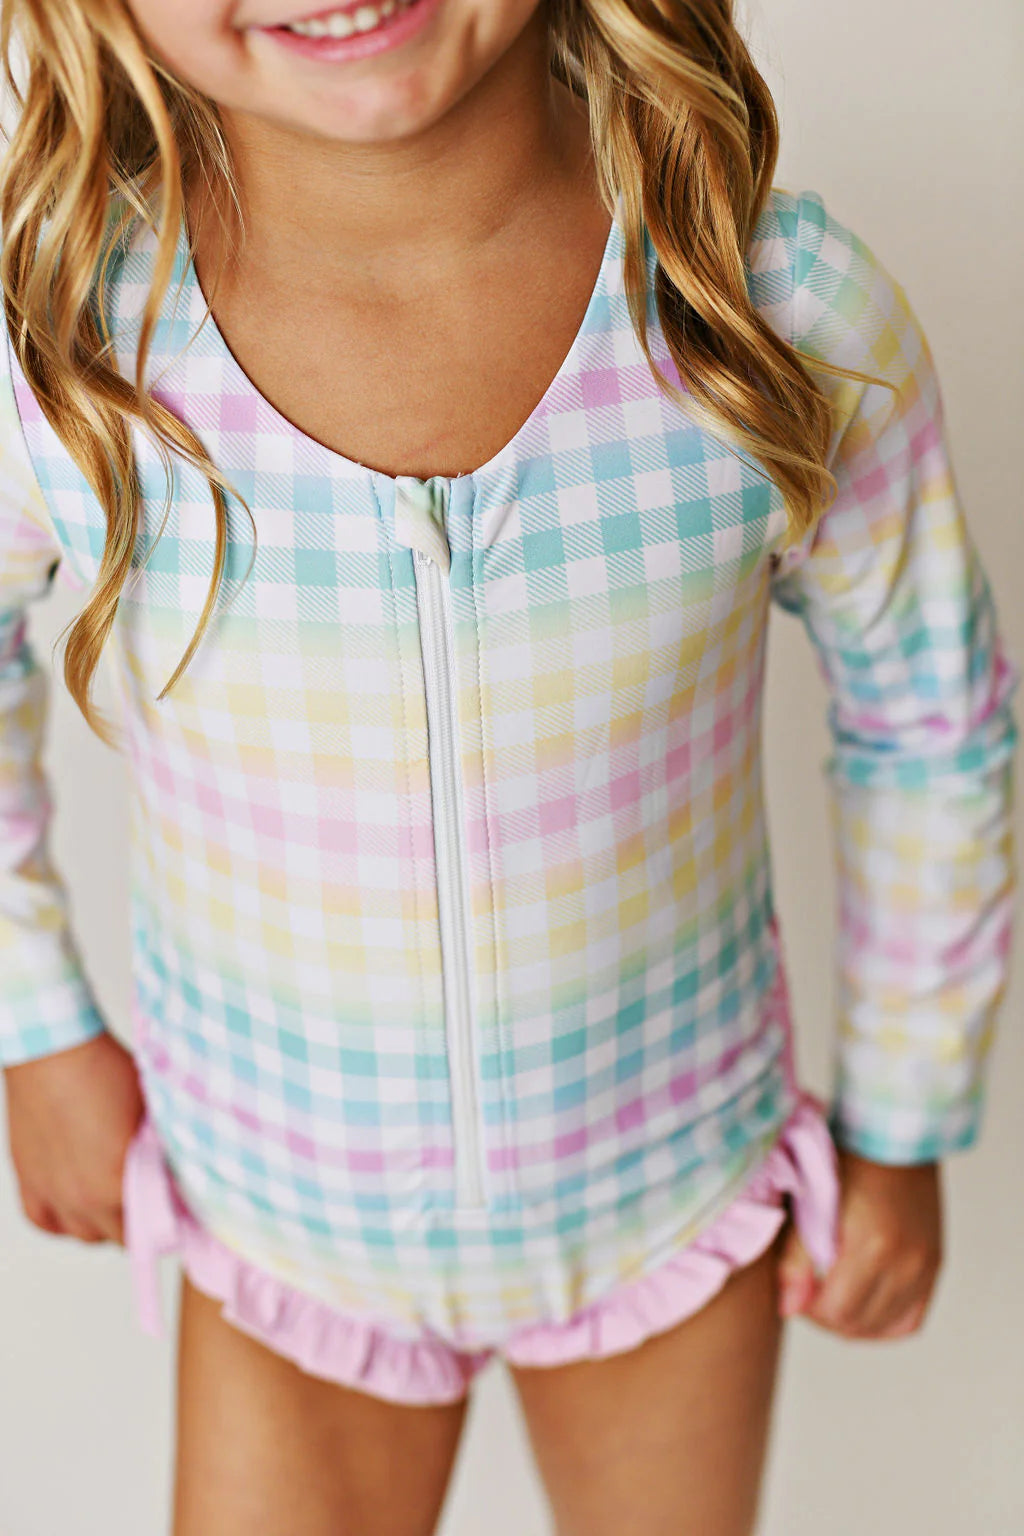 Rainbow Gingham One-Piece Long Sleeve Swimsuit  - Doodlebug's Children's Boutique